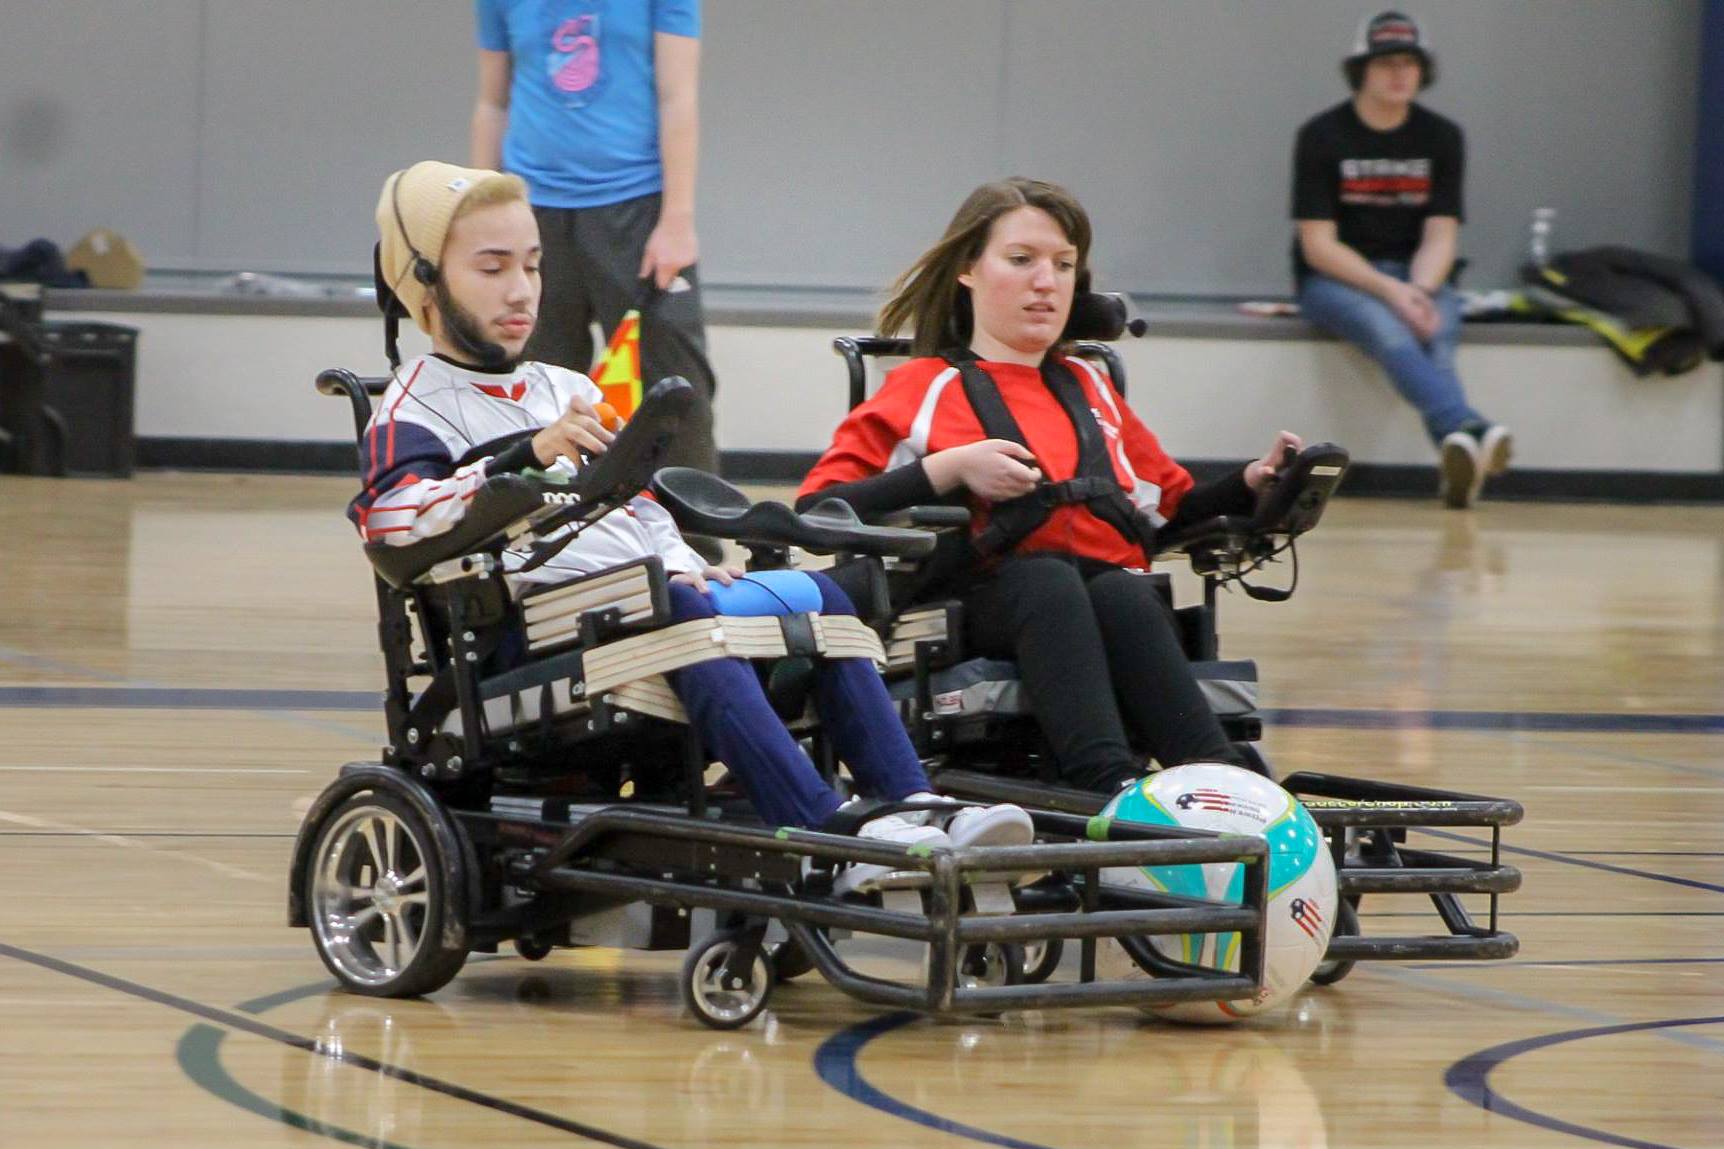 Competitors playing power soccer, including a member of the Wisconsin Warriors